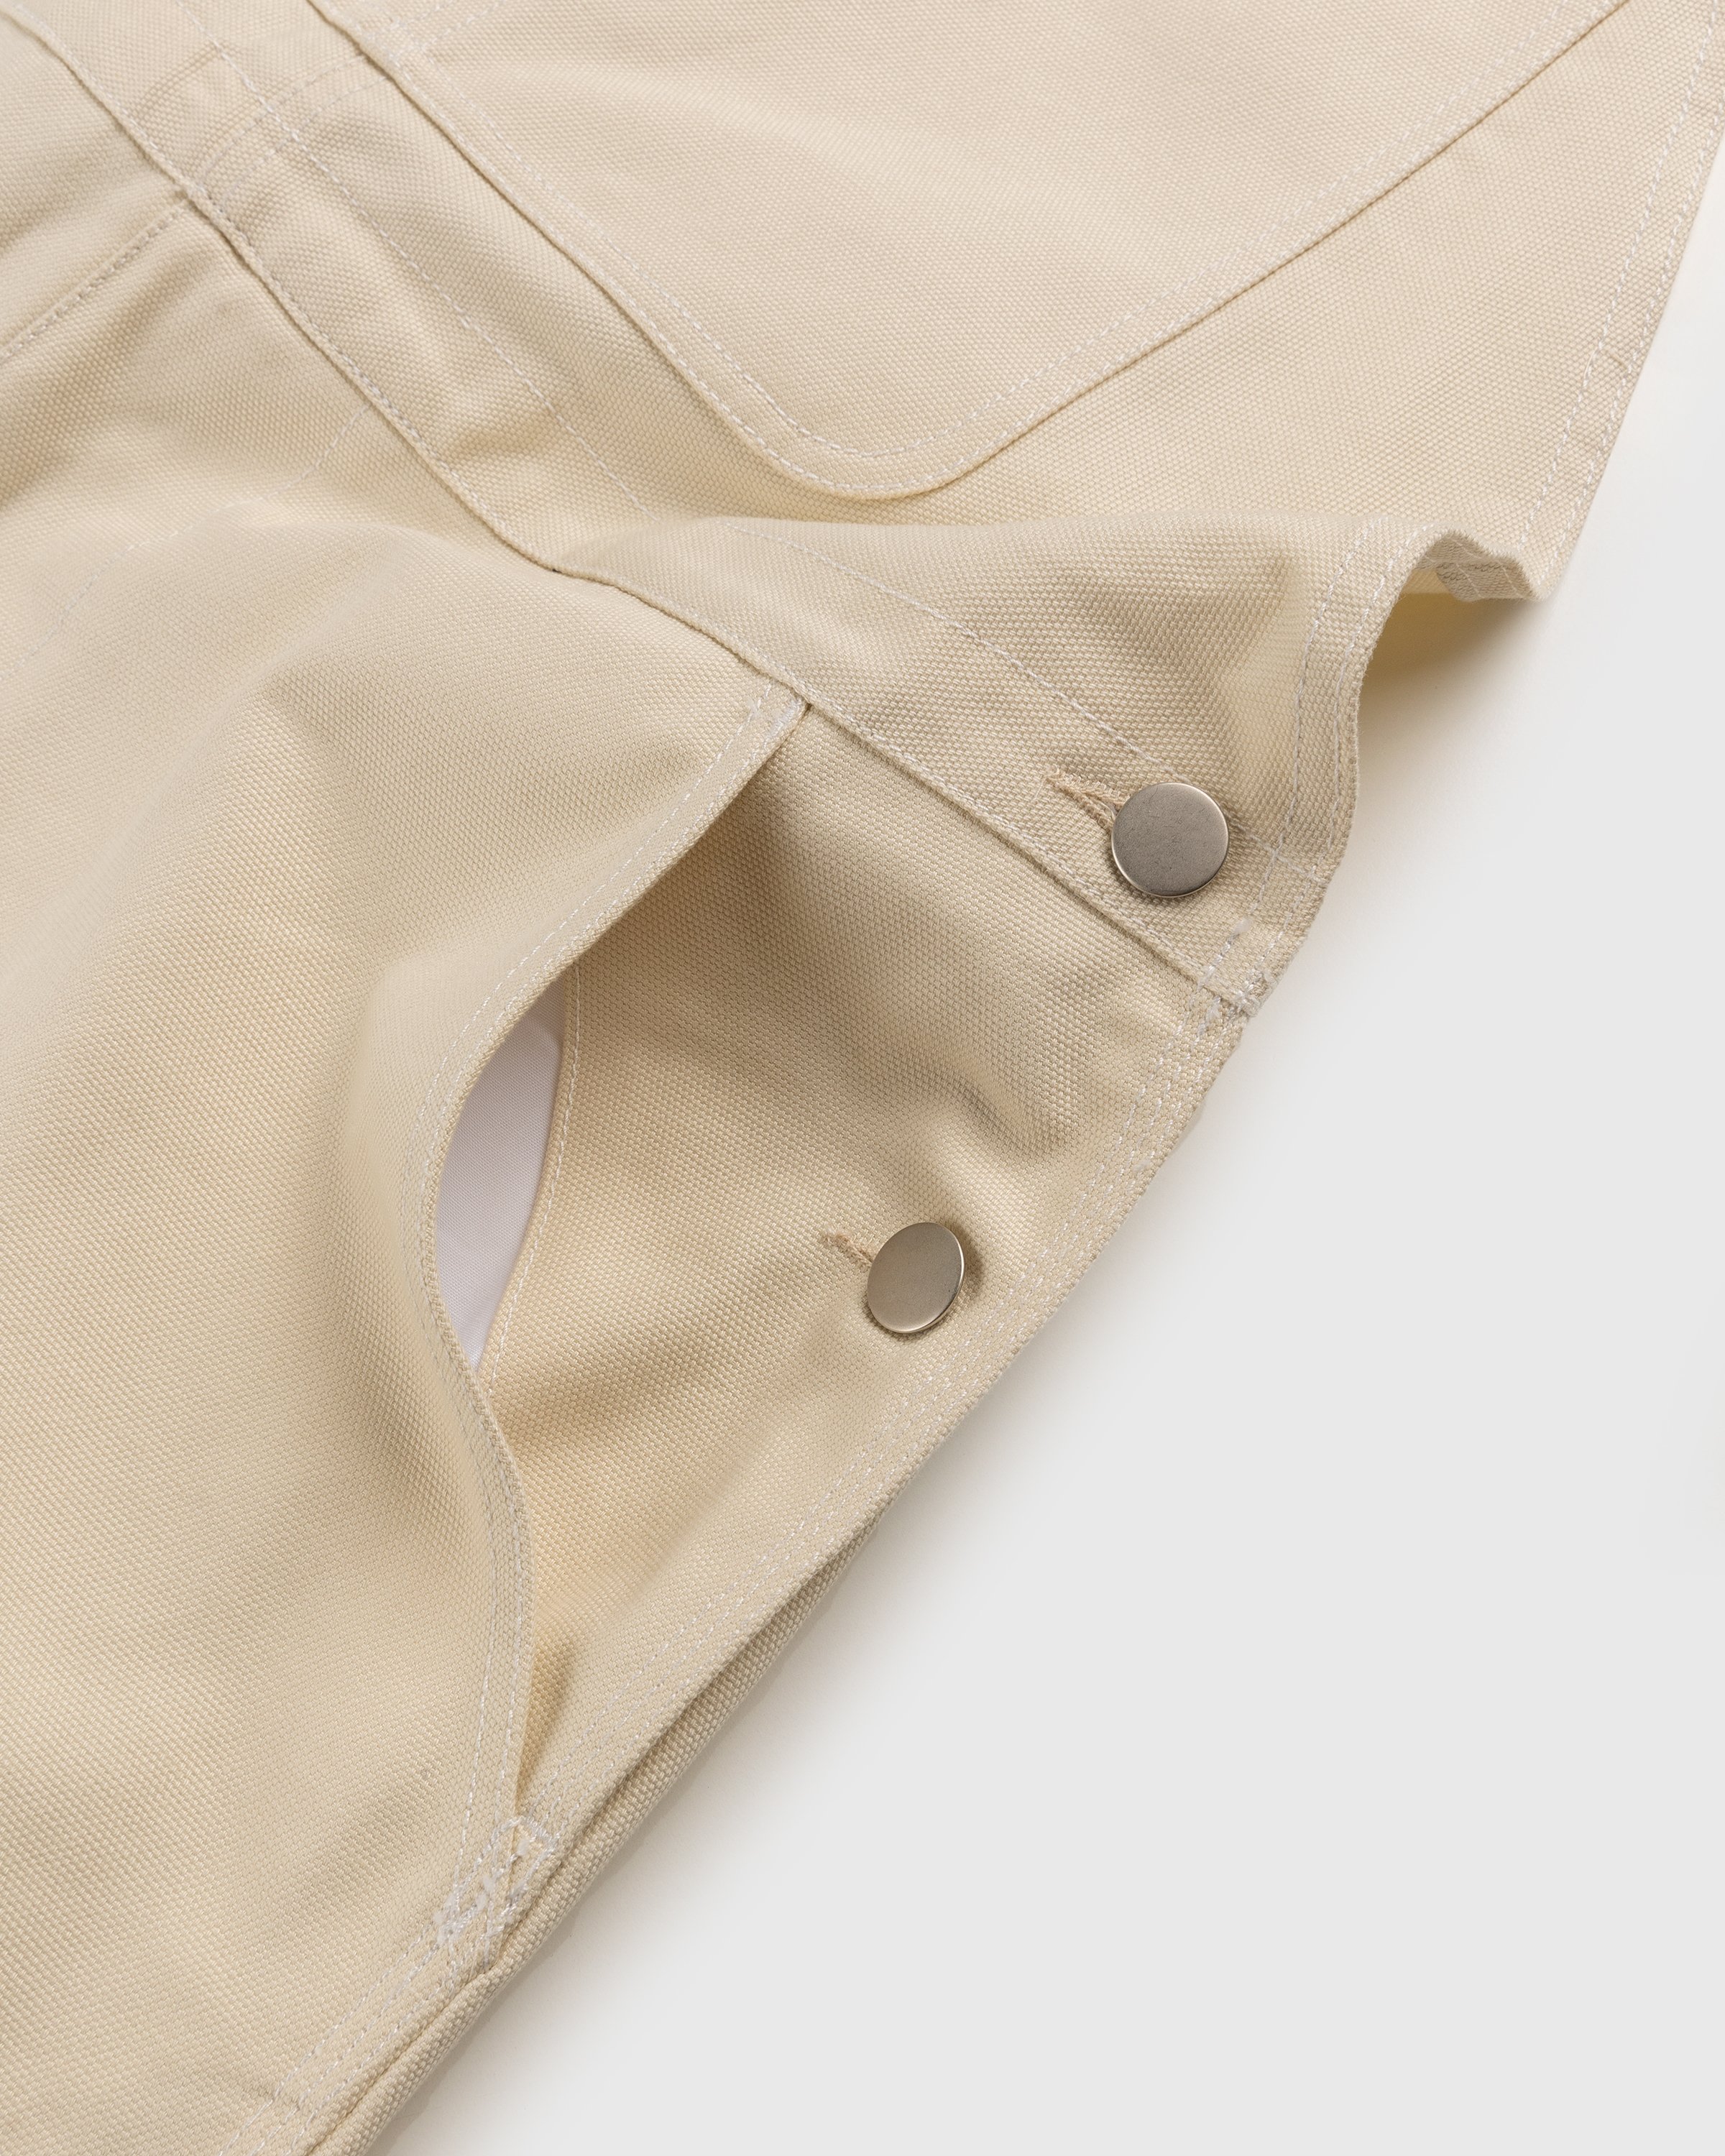 RUF x Highsnobiety - Cotton Overalls Natural - Clothing - Beige - Image 7